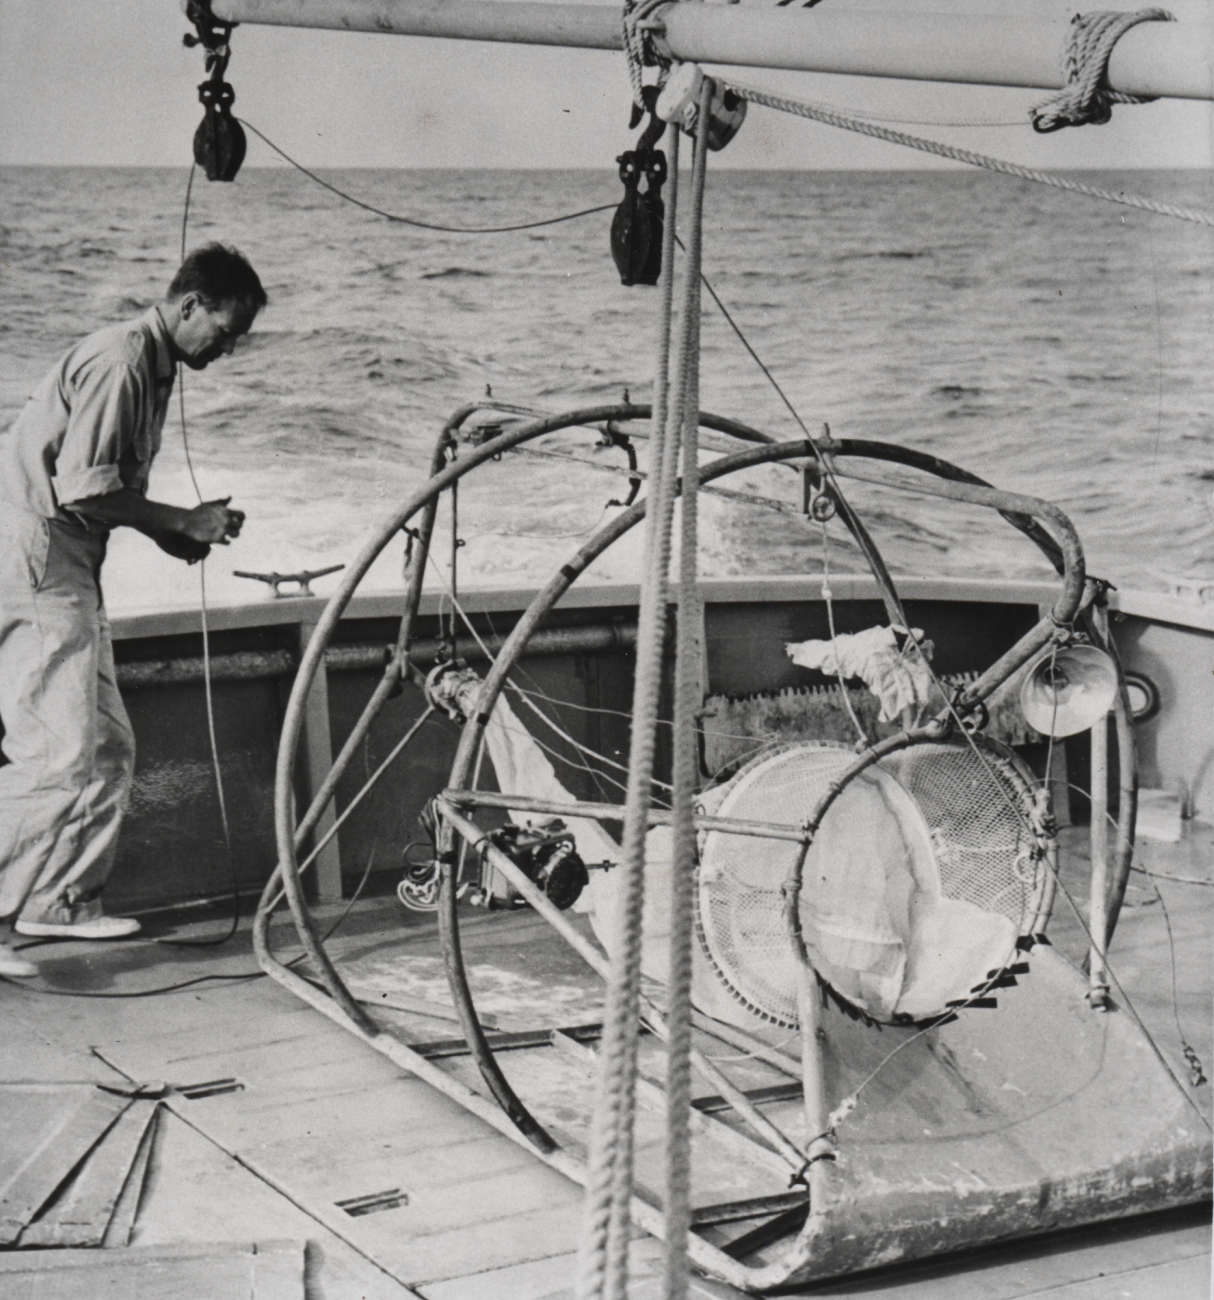 The Beyer sled, used to sample plankton occurring near the sea bottom